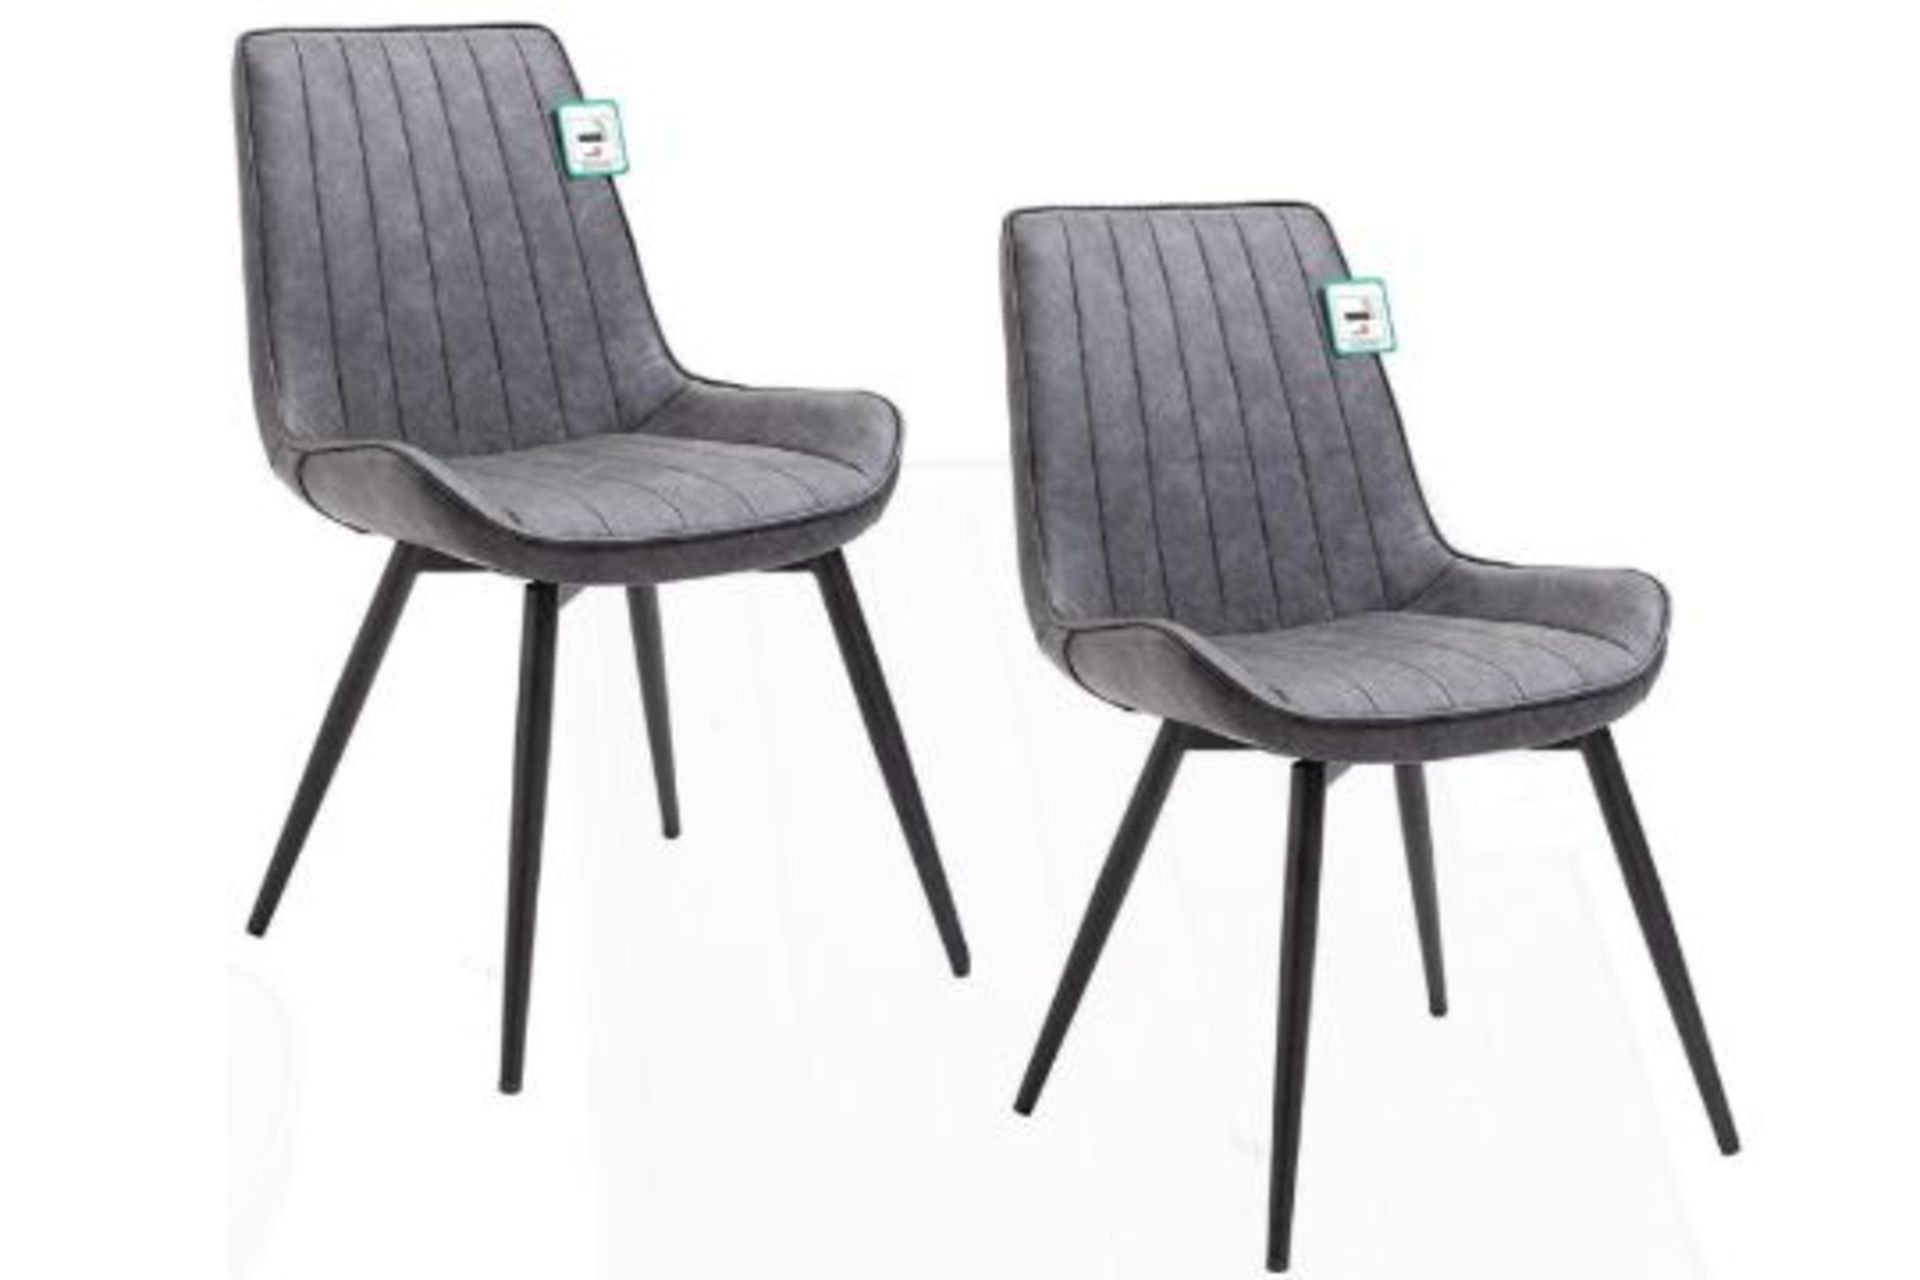 Cala Set of 2 Grey PU leather Dining Chairs. -BI. RRP £259.99. A set of 2 chairs in vintage style